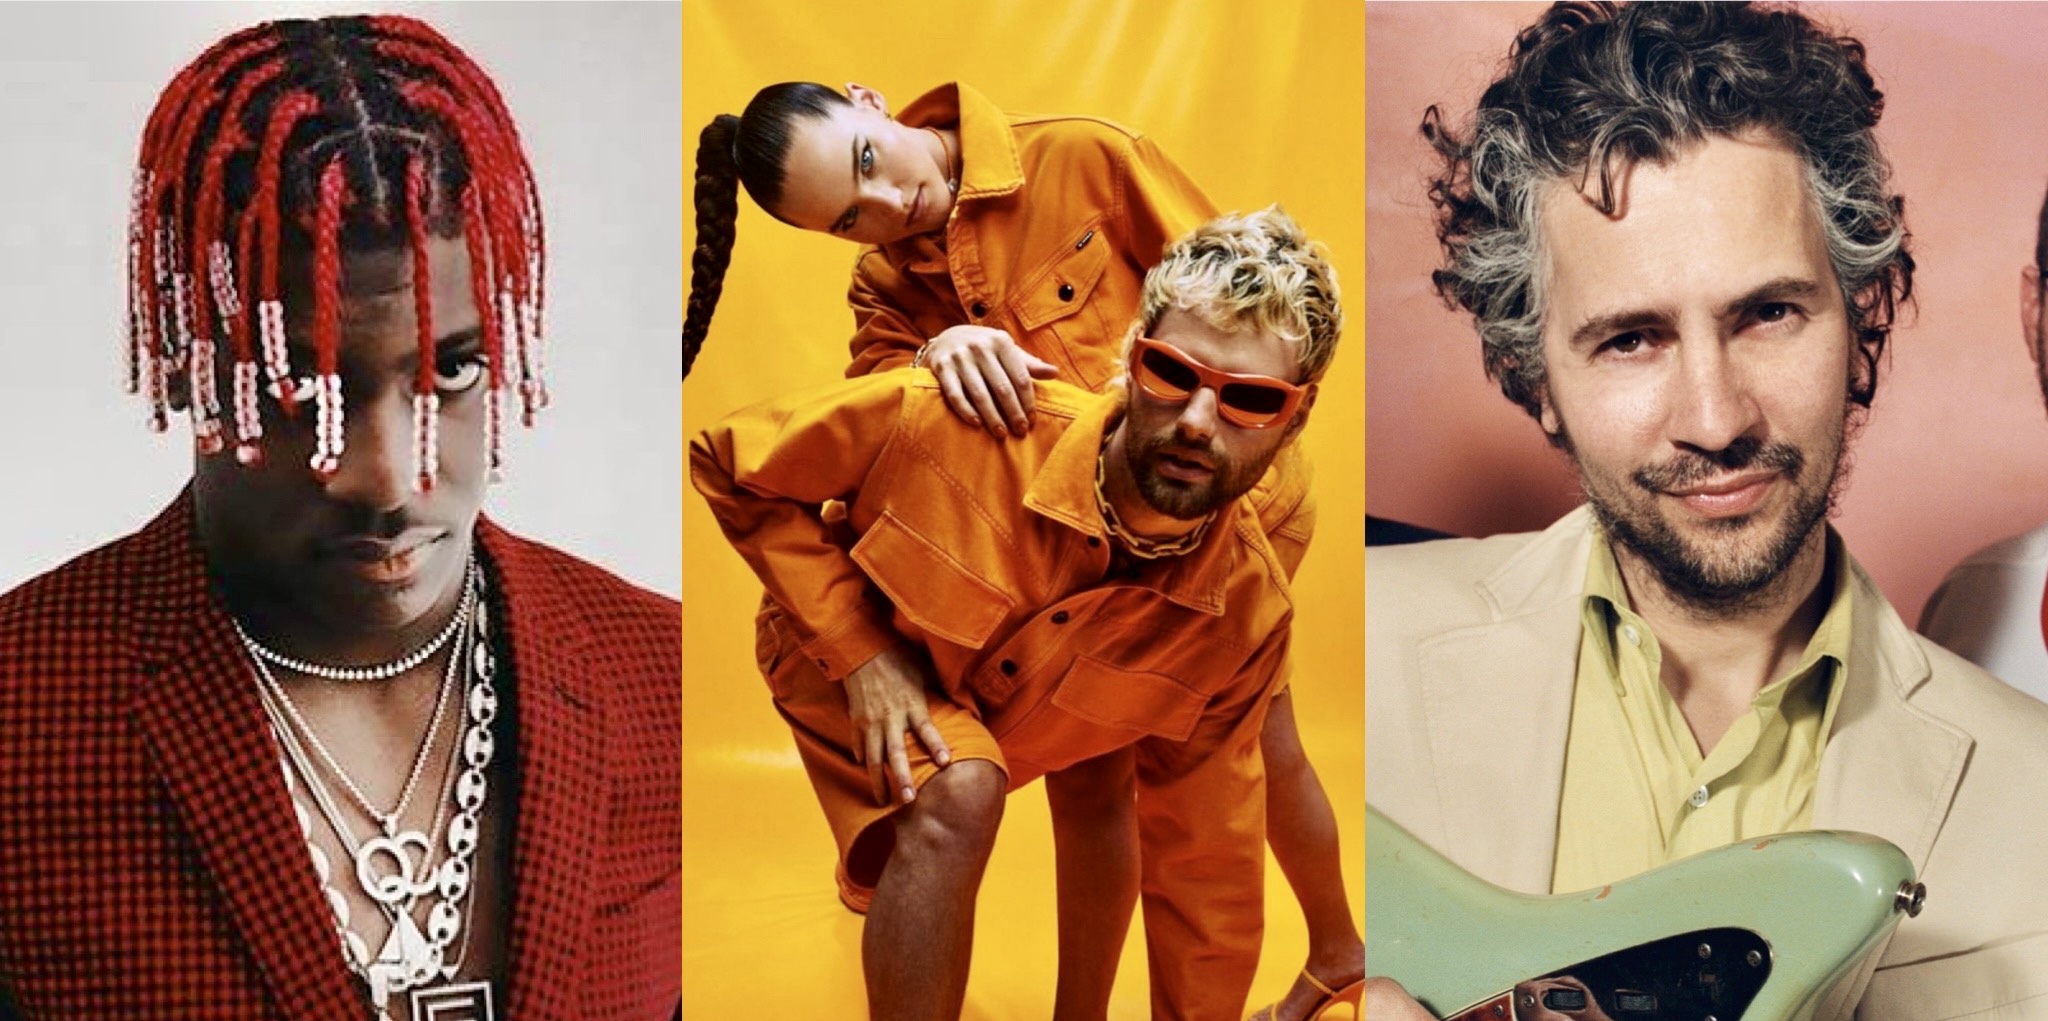 Osheaga 2023 complete lineup features Lil Yachty, Sofi Tukker, Flaming Lips & more